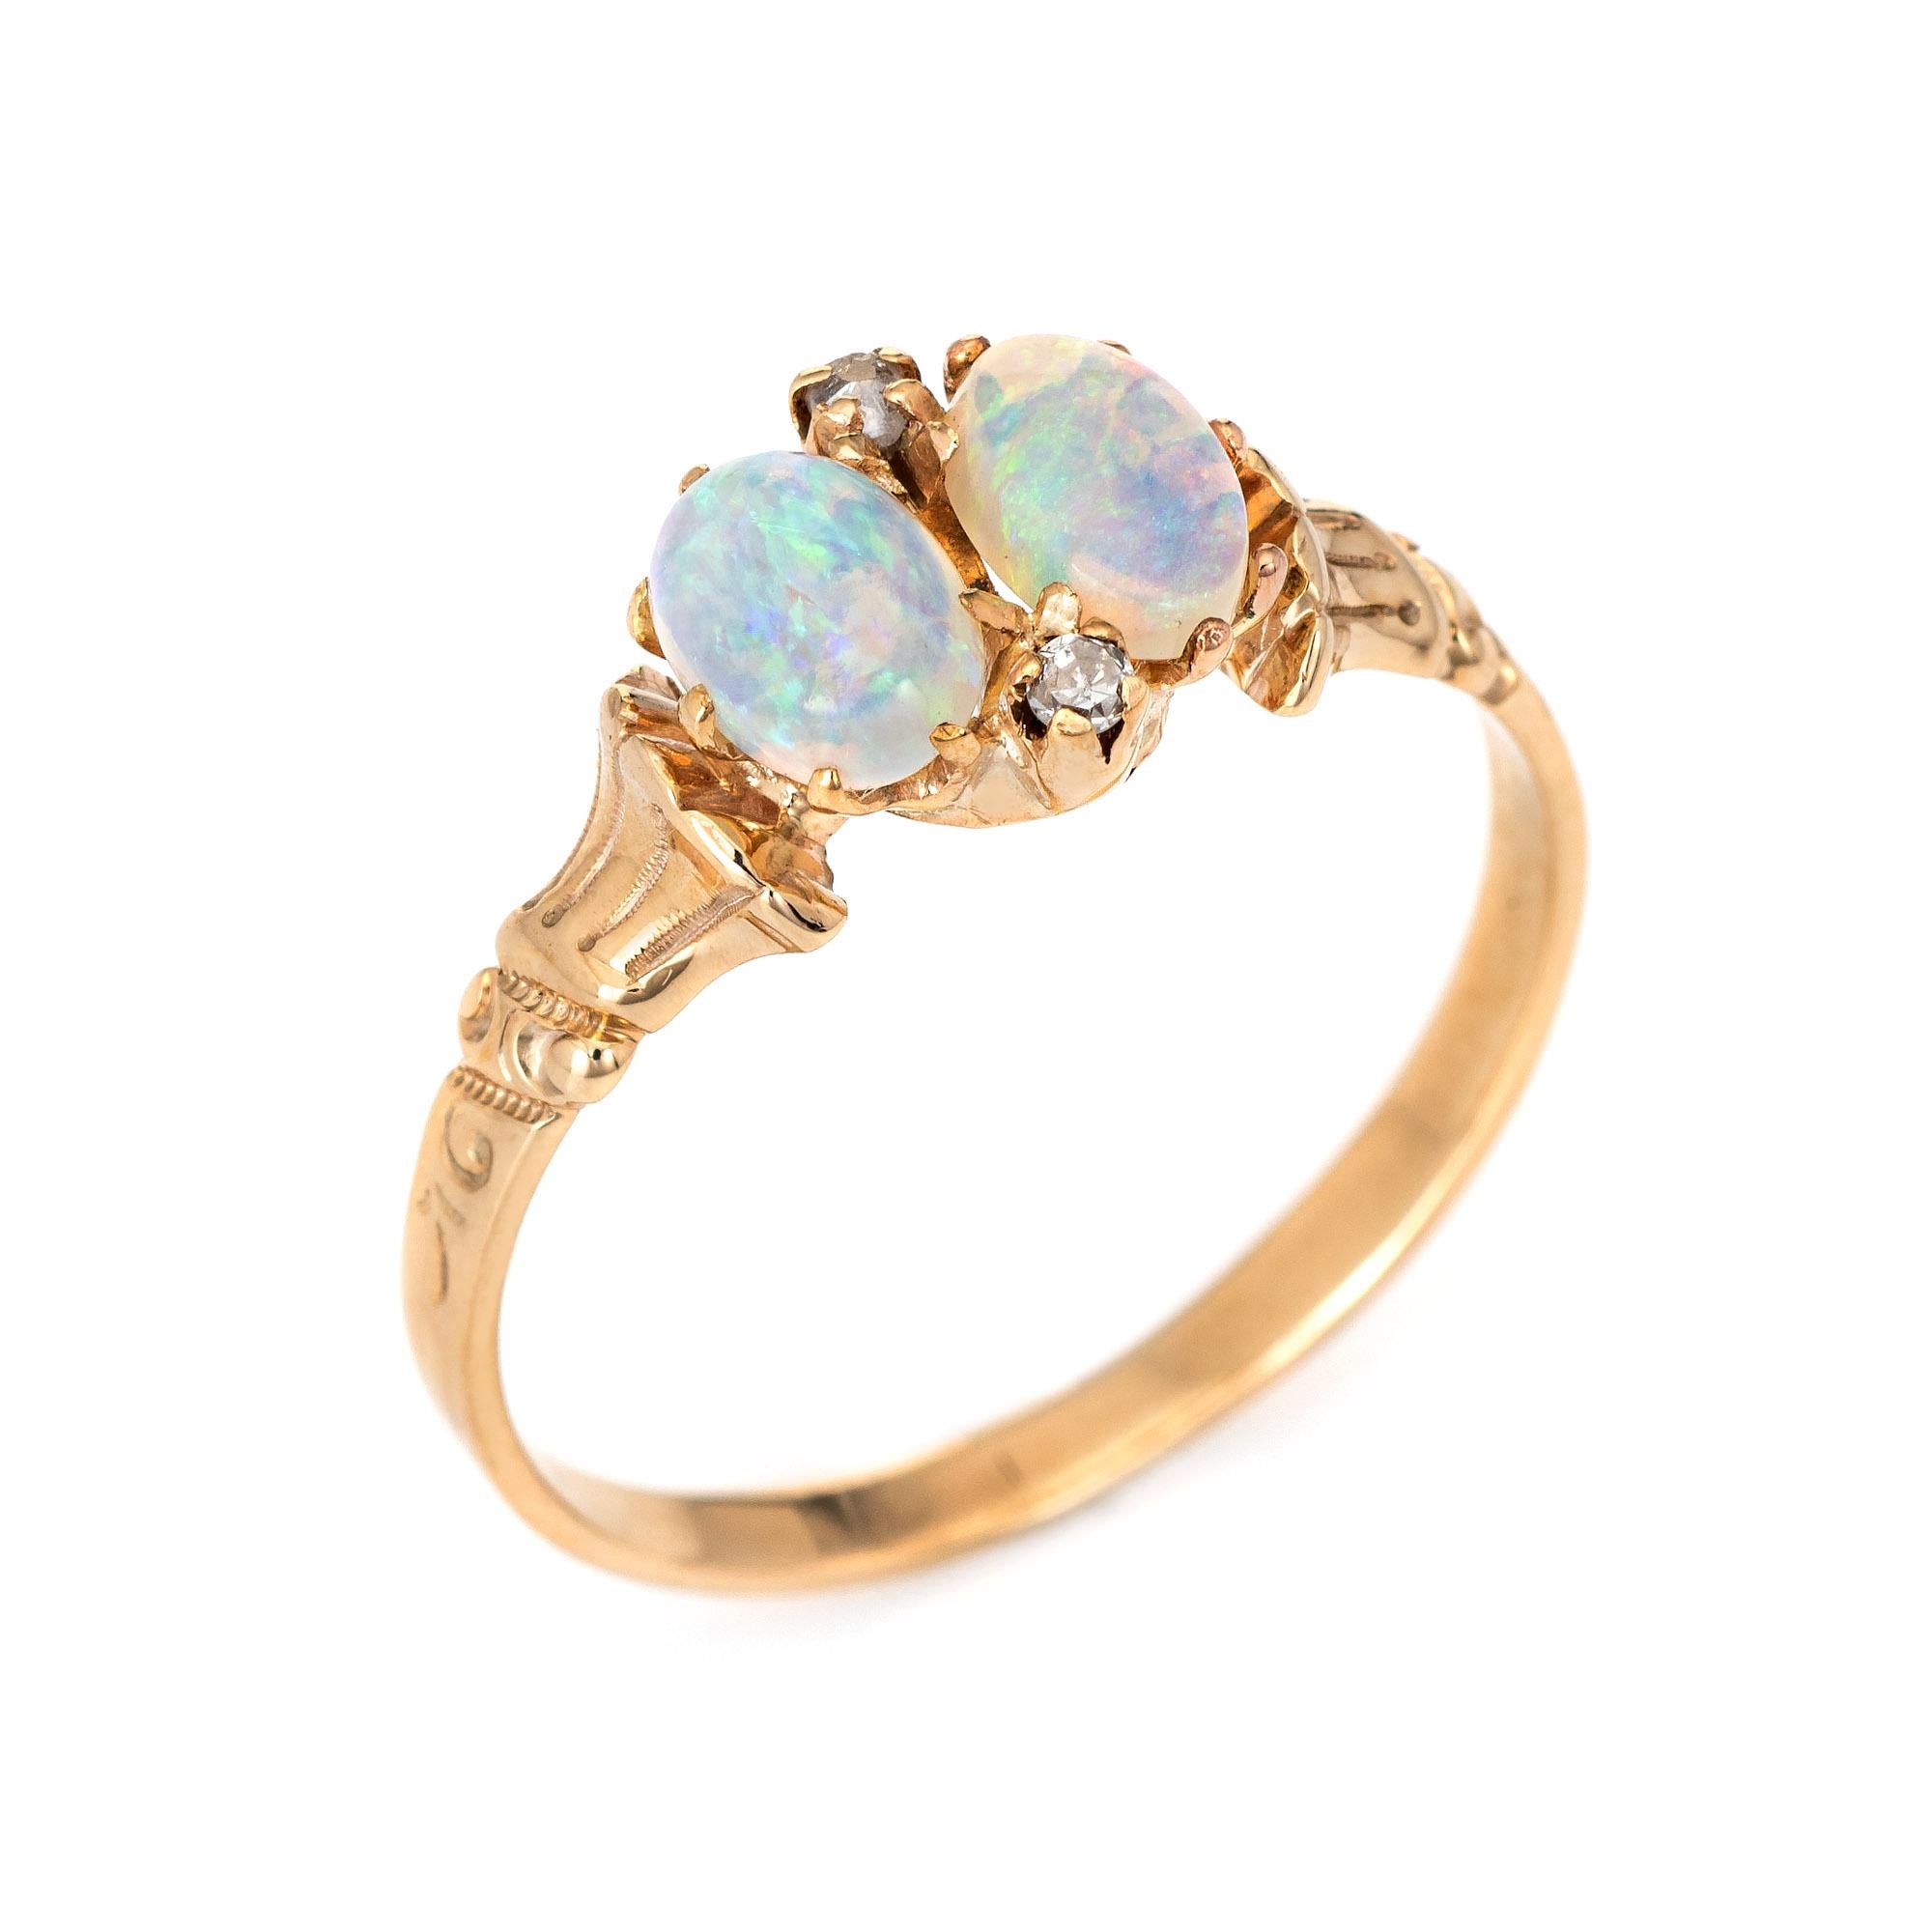 Finely detailed antique Victorian ring (circa 1880s to 1900s) crafted in 10 karat yellow gold. 

Two opals measure 7mm x 4.25mm (estimated at 0.50 carats each - 1 carat total estimated weight). Two old rose cut diamonds are estimated at 0.02 carats